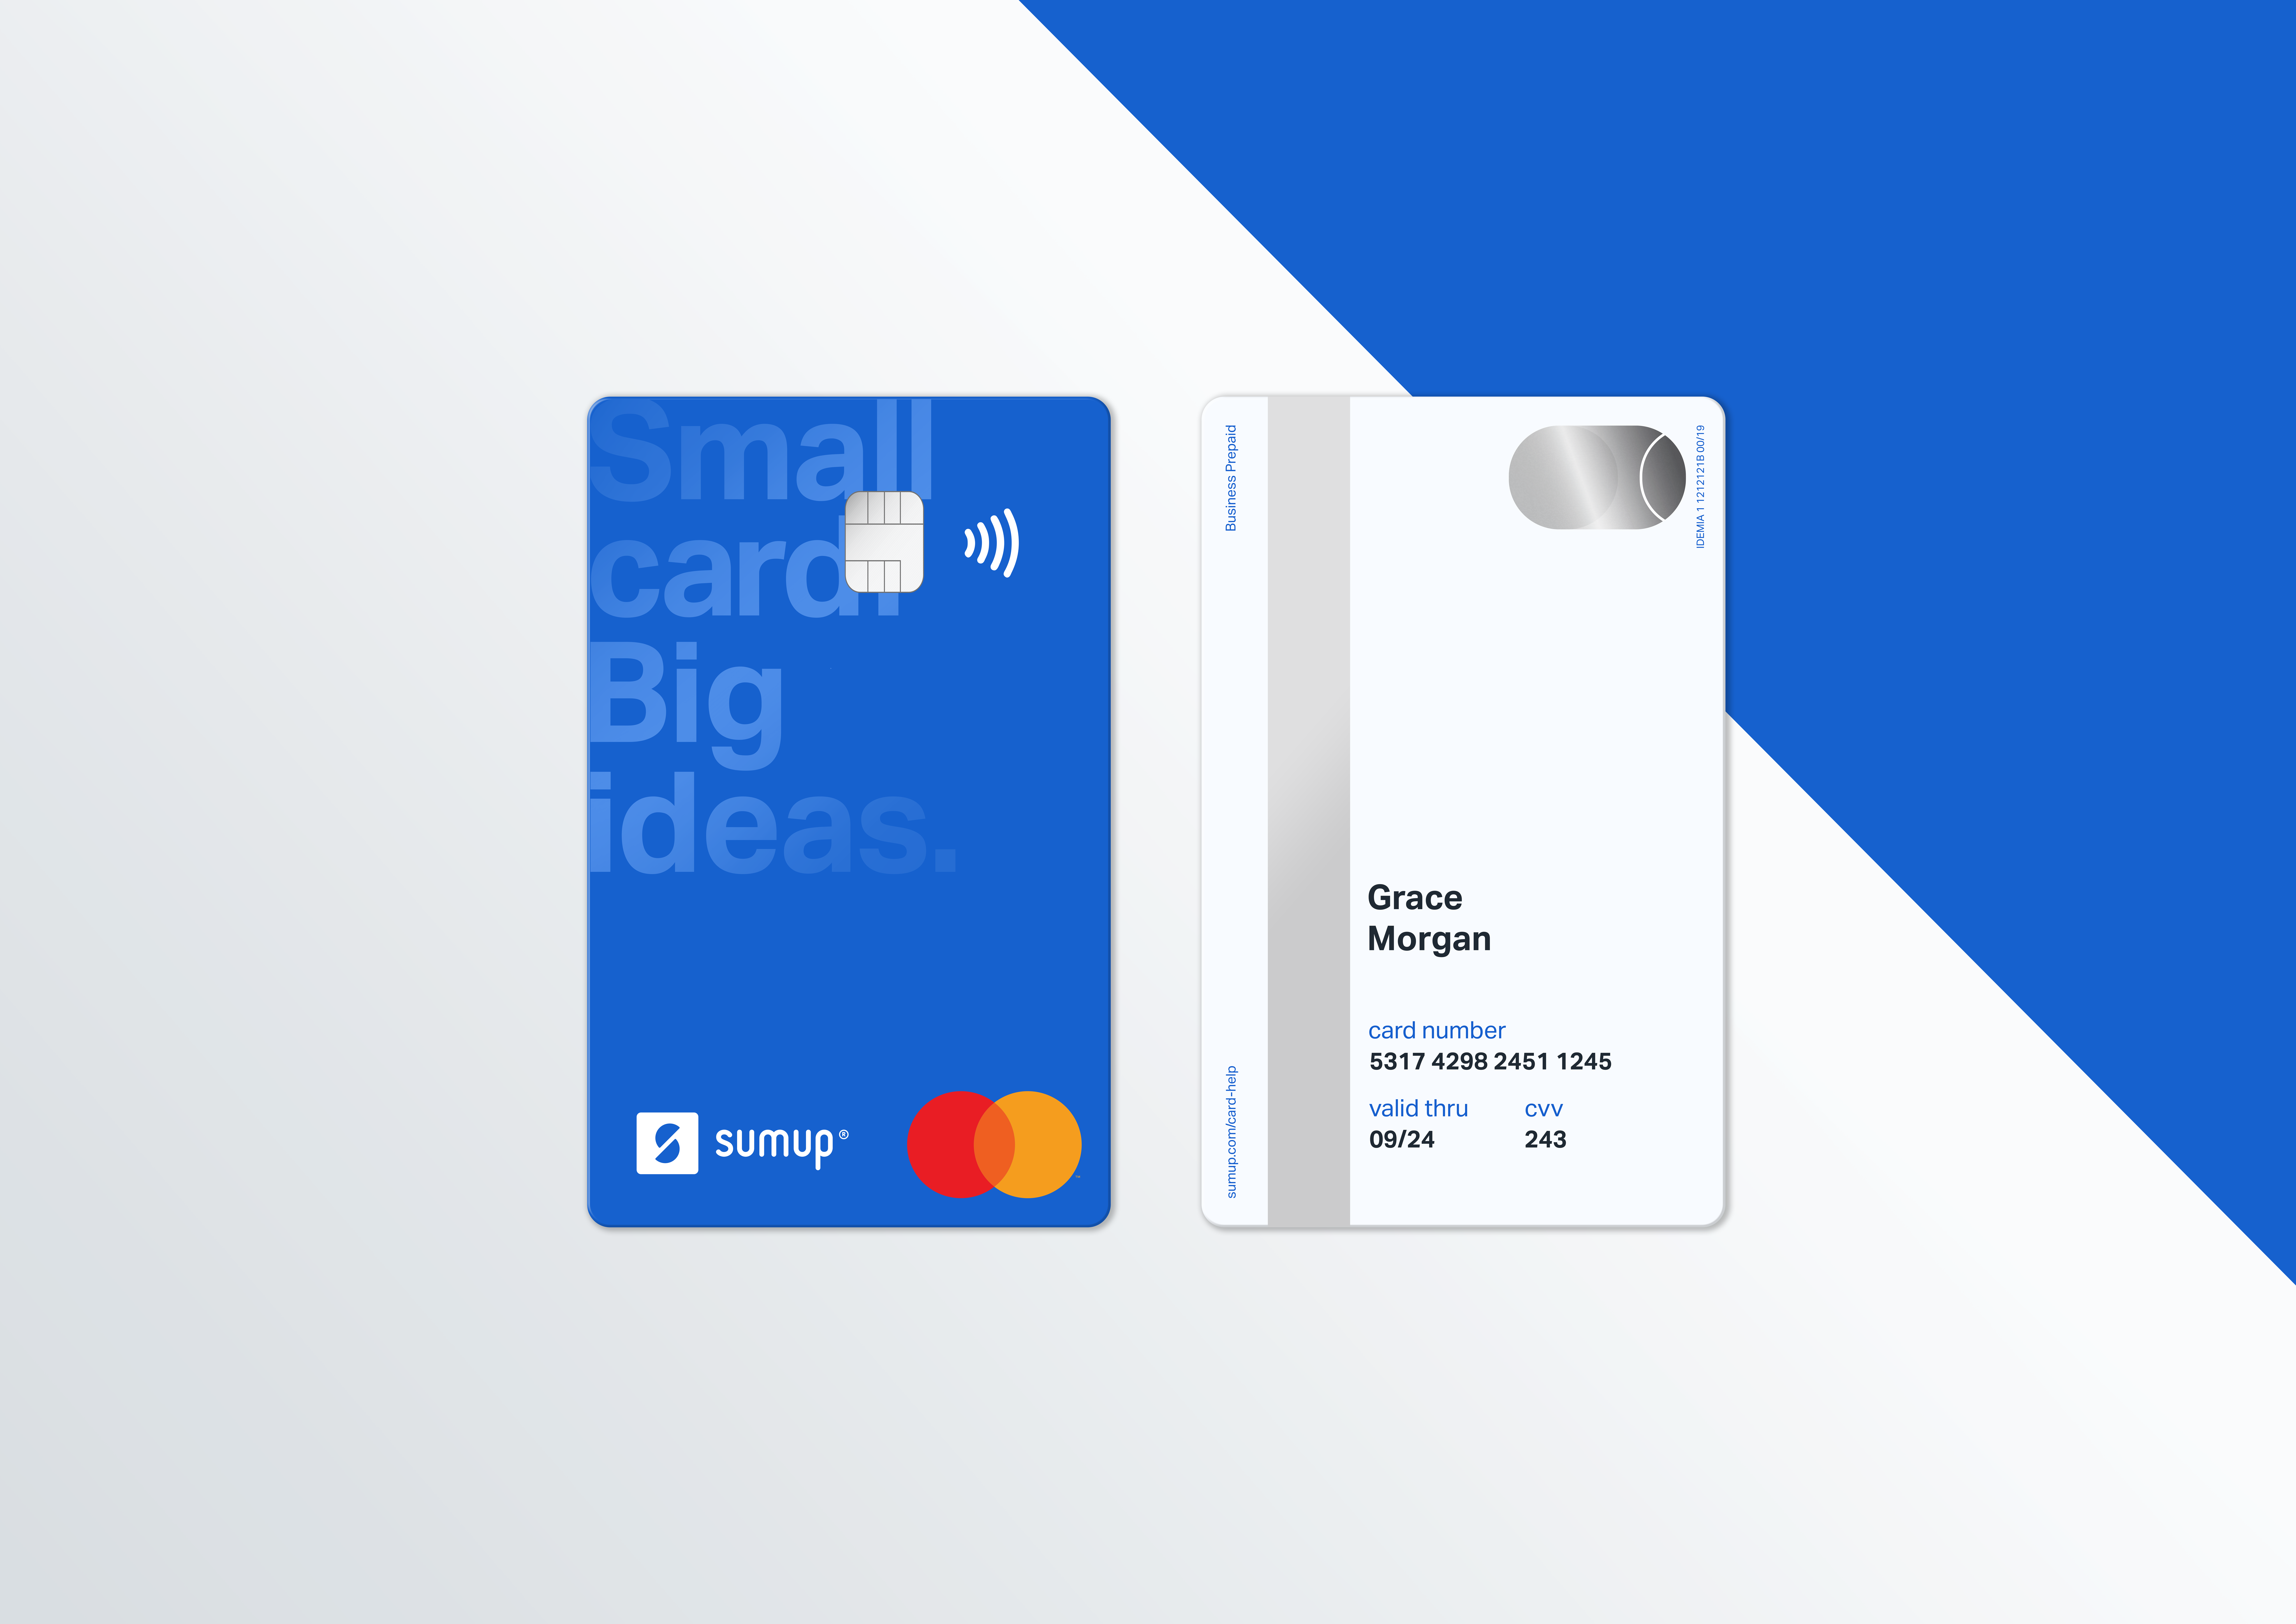 SumUp launches Mastercard-powered 'SumUp Card' for business